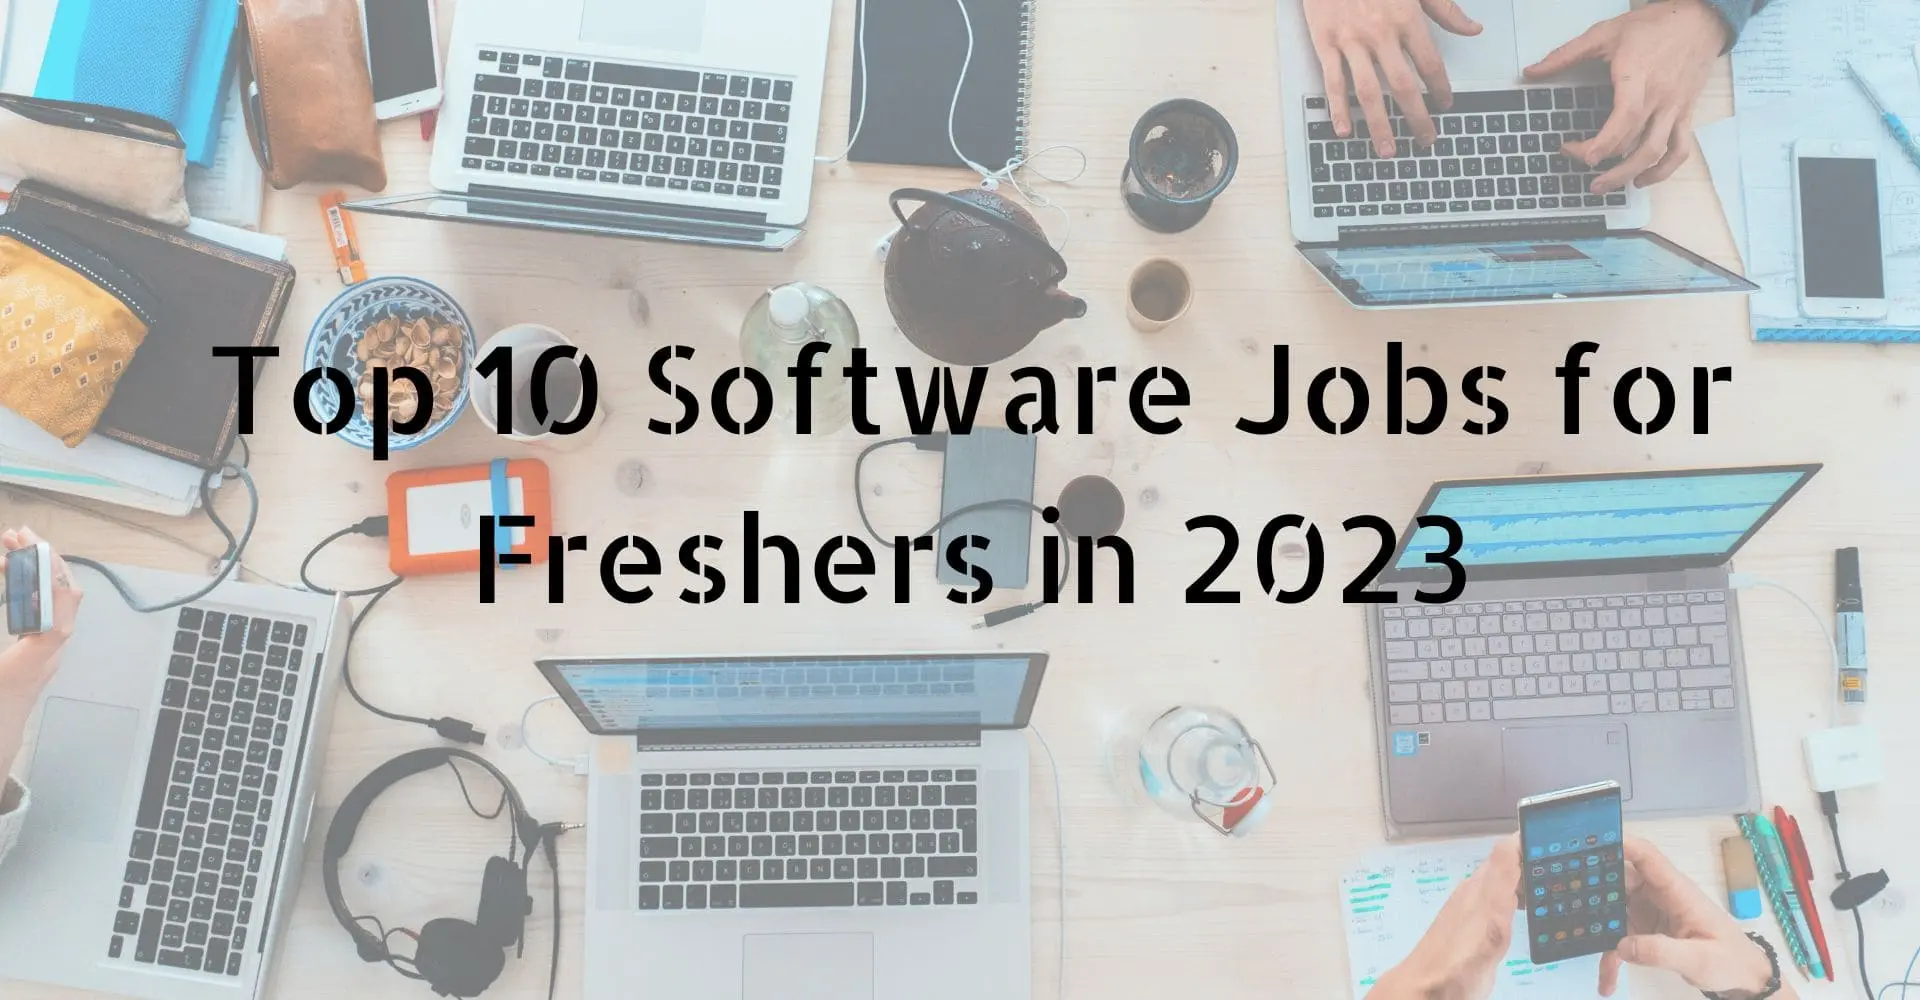 Top 10 Software Jobs For Freshers In 2023.webp